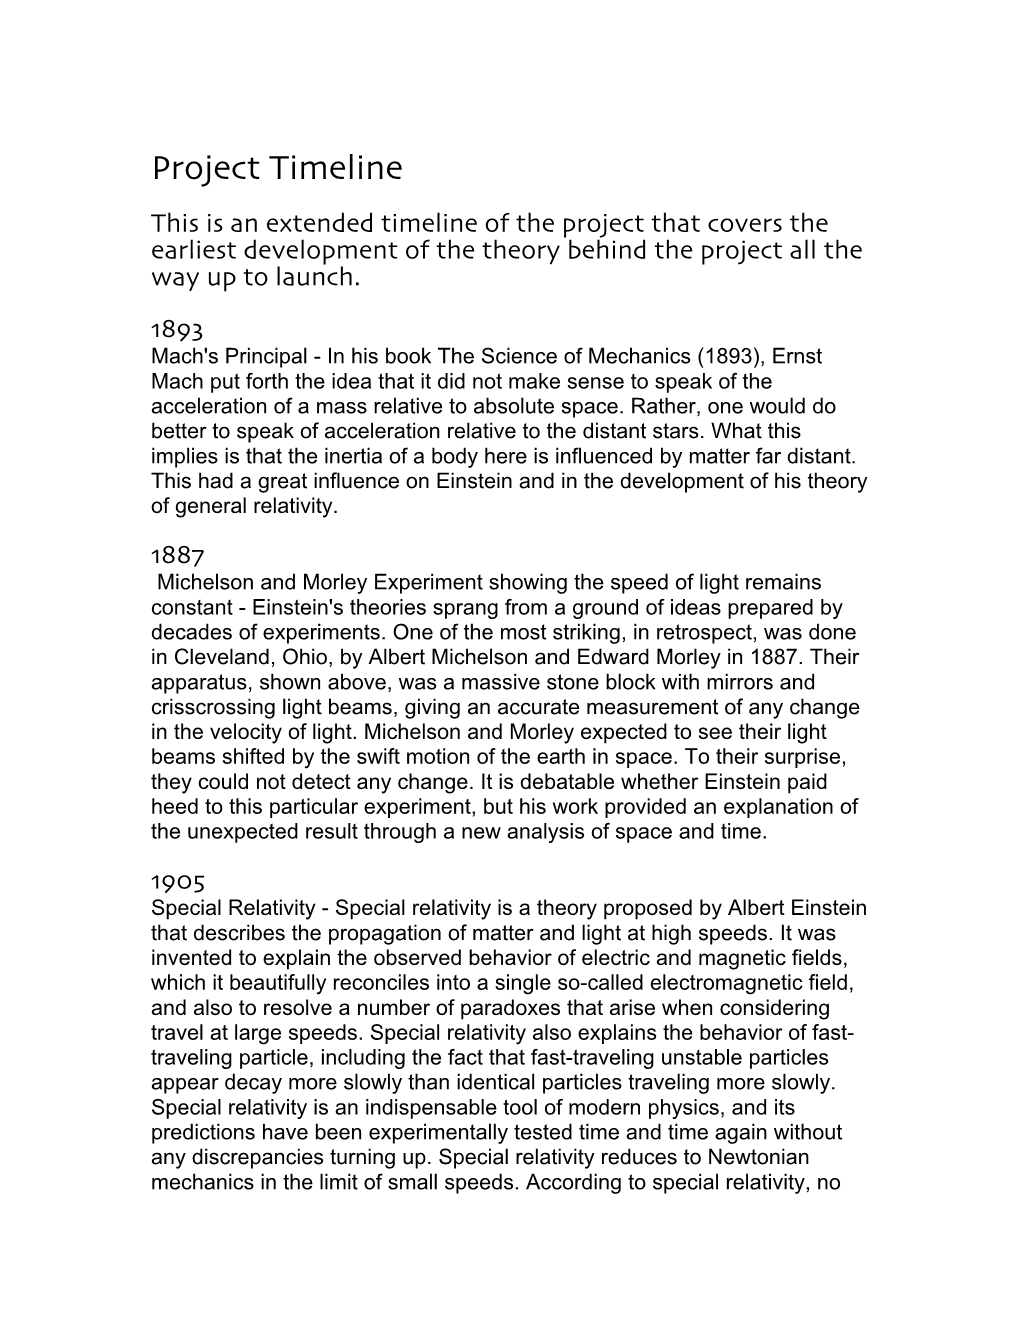 Project Timeline This Is an Extended Timeline of the Project That Covers the Earliest Development of the Theory Behind the Project All the Way up to Launch